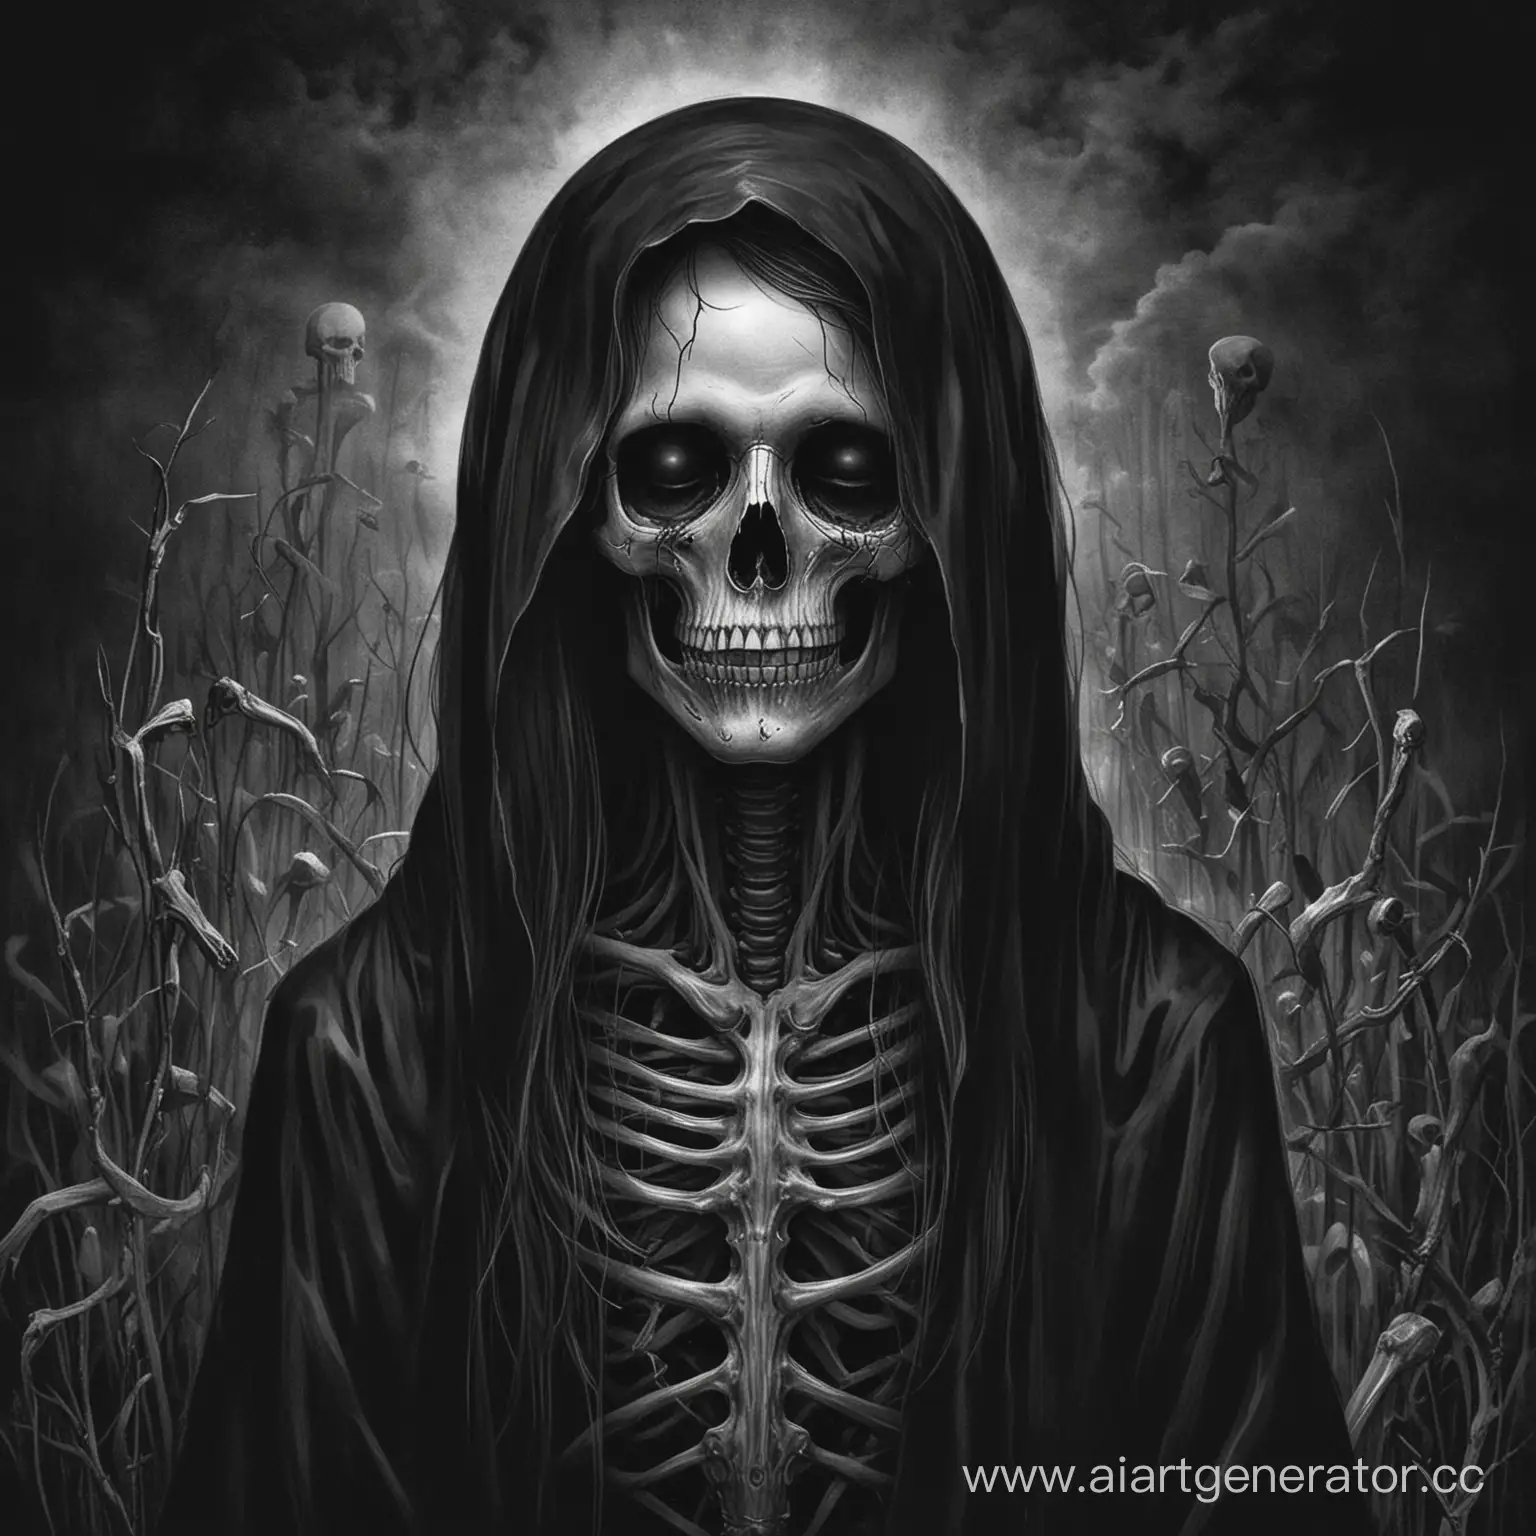 Eerie-Depiction-of-Death-in-Shadowy-Darkness